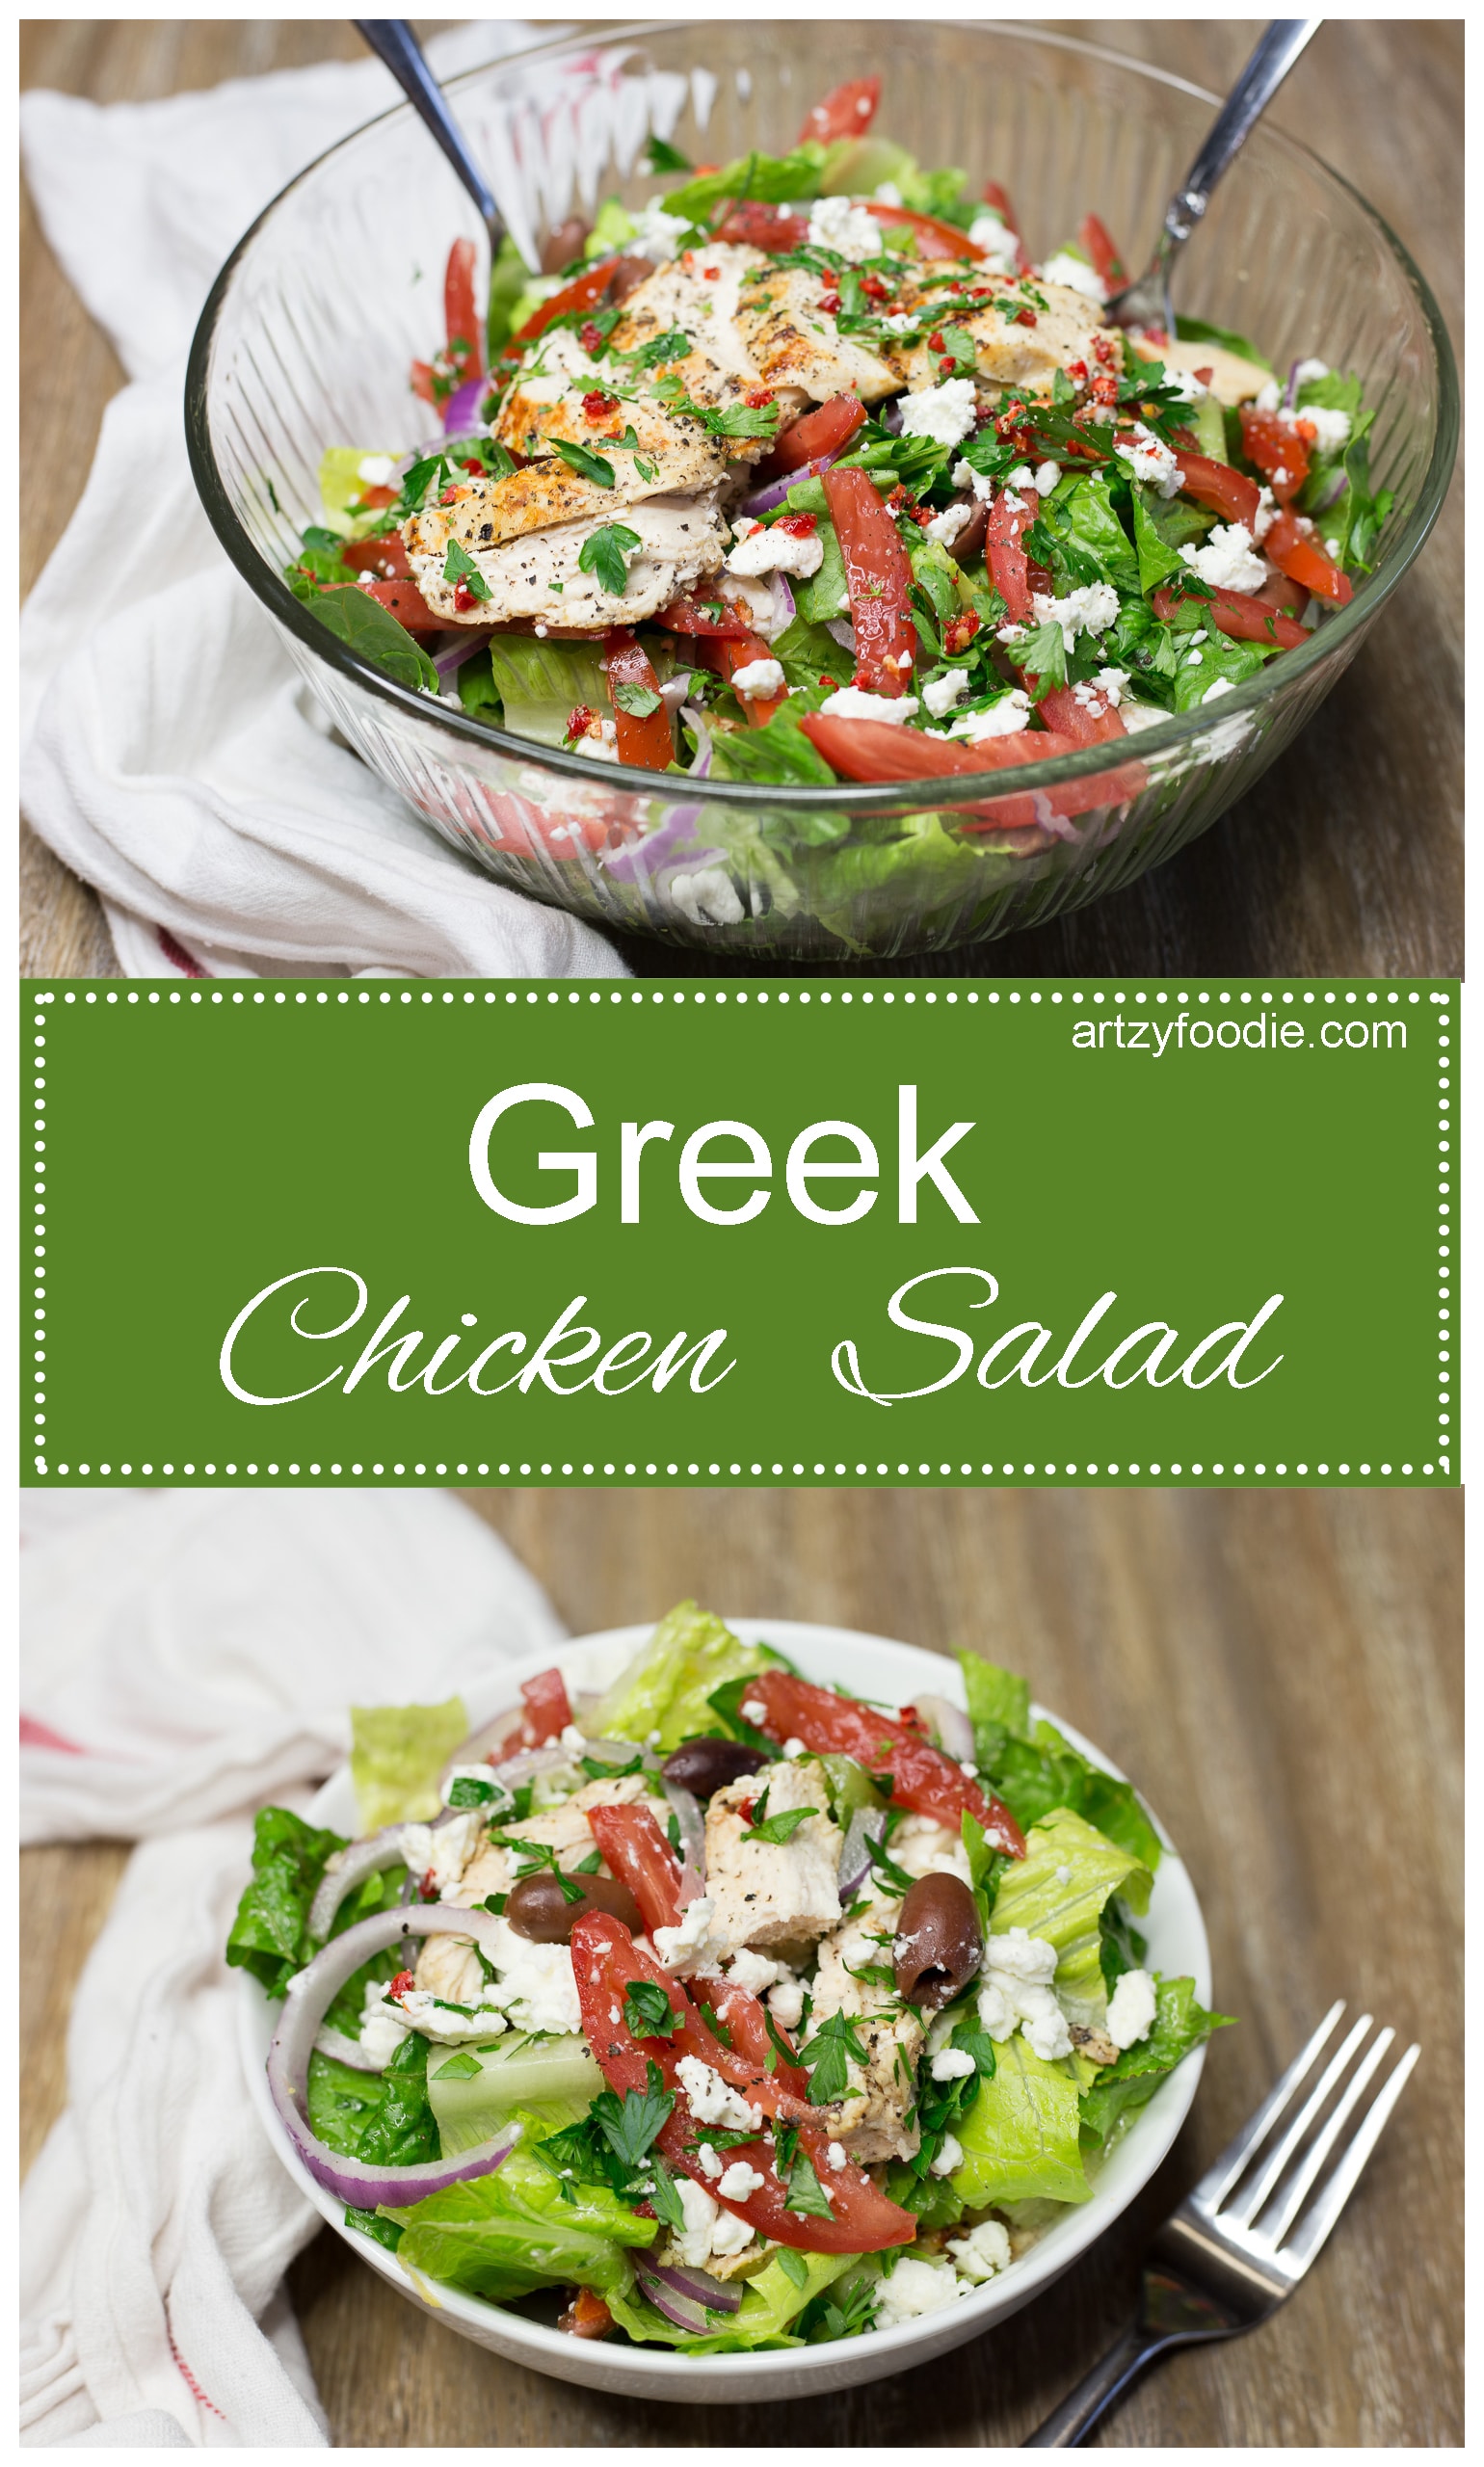 Greek chicken salad is a fresh, hearty salad that is sure to satisfy your hunger! |artzyfoodie.com|